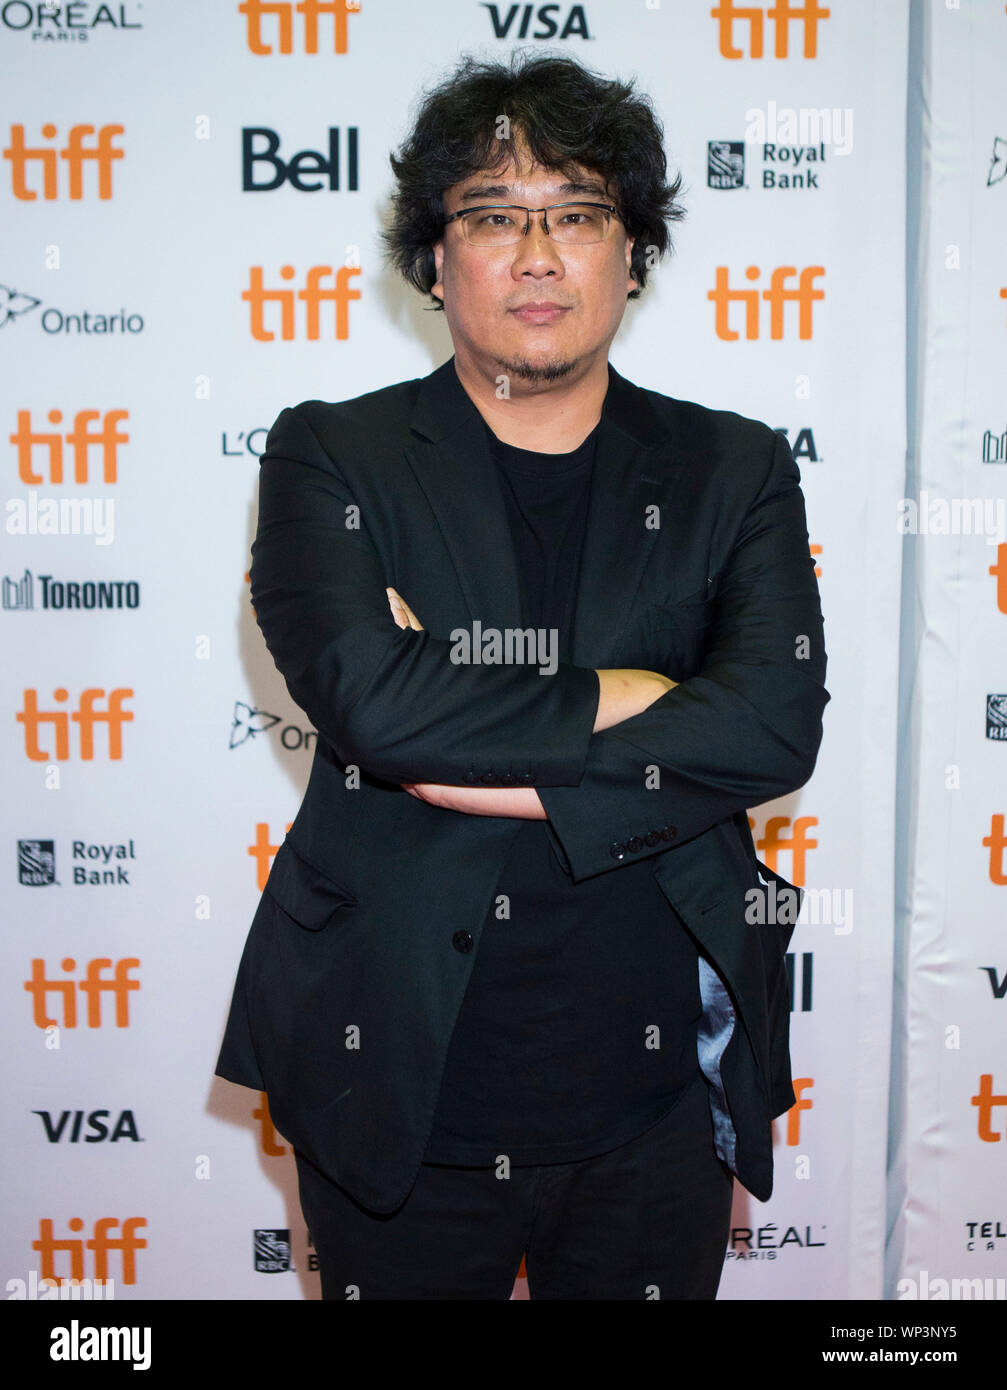 Toronto, Canada. 6th Sep, 2019. Director Bong Joon-ho poses for photos before the Canadian premiere of the film 'Parasite' at Ryerson Theatre during the 2019 Toronto International Film Festival (TIFF) in Toronto, Canada, Sept. 6, 2019. Credit: Zou Zheng/Xinhua Stock Photo